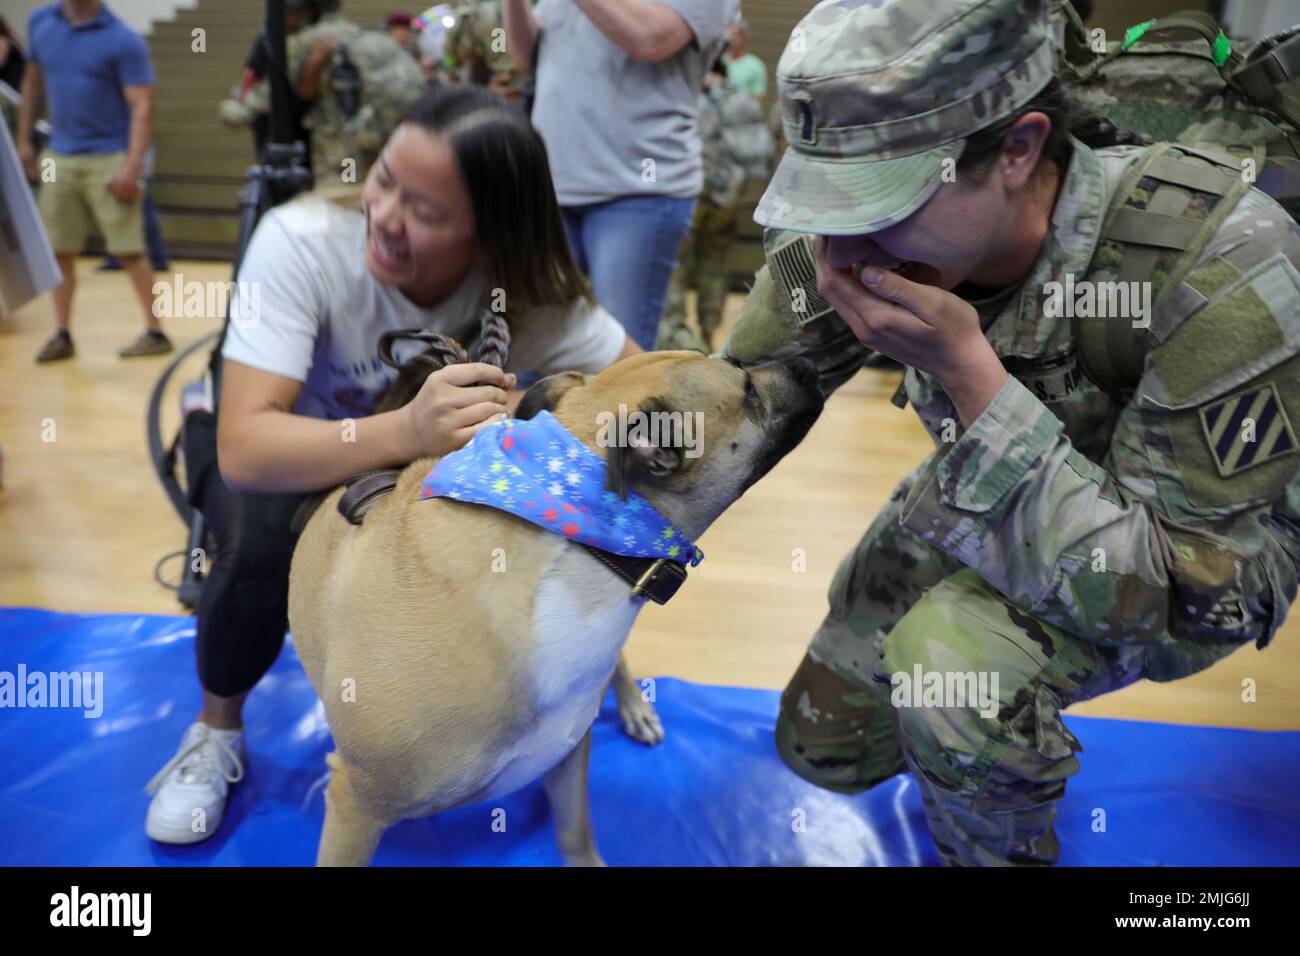 U.S. Army 1st Lt. Gina Kruegler, an ordnance officer assigned to 3rd Battalion, 69th Armor Regiment, 1st Armored Brigade Combat Team, 3rd Infantry Division, reunites with her best friend’s dog, Oscar, during a redeployment ceremony at Fort Stewart, Georgia, Aug. 29, 2022. The ceremony was held at Newman Gym to mark the redeployment of the brigade after a six-month deployment to Grafenwoehr Training Area, Germany. Stock Photo